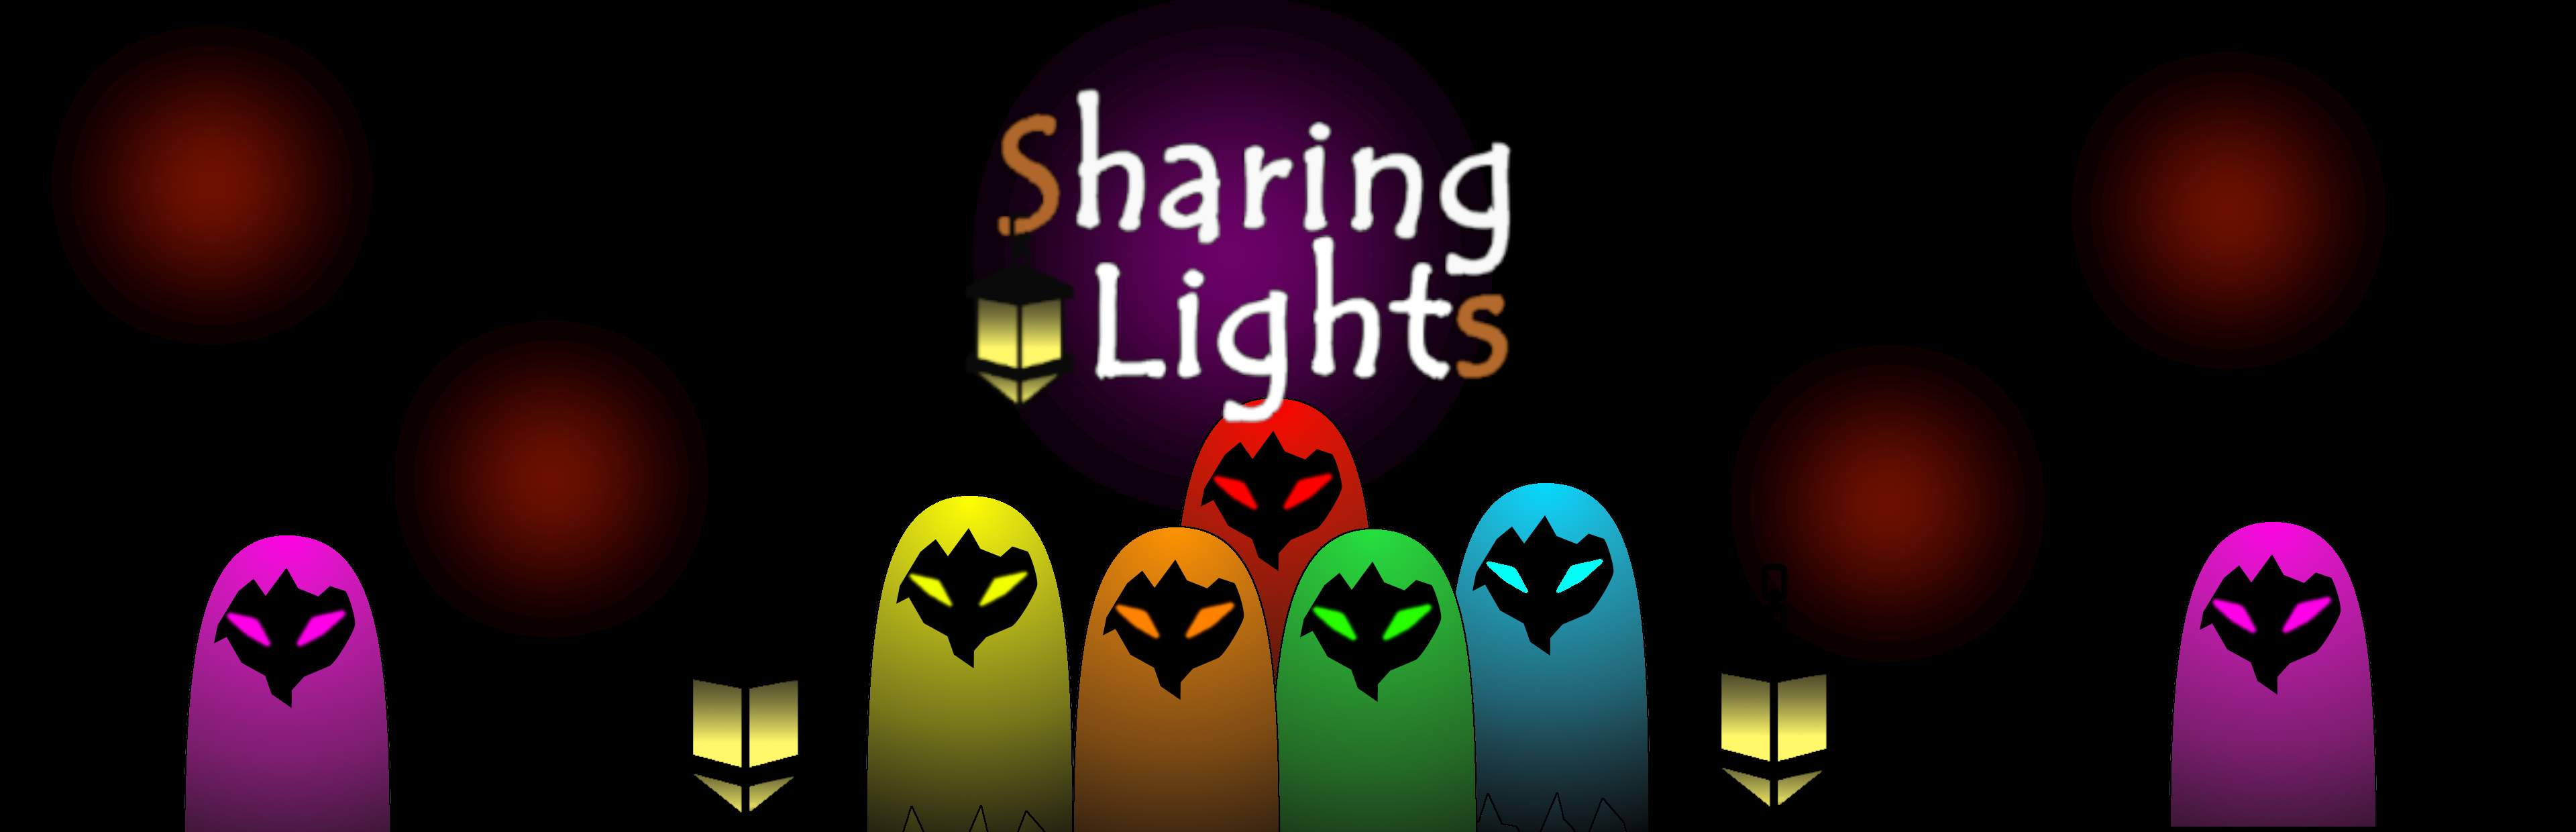 Sharing Lights - Puzzle Game